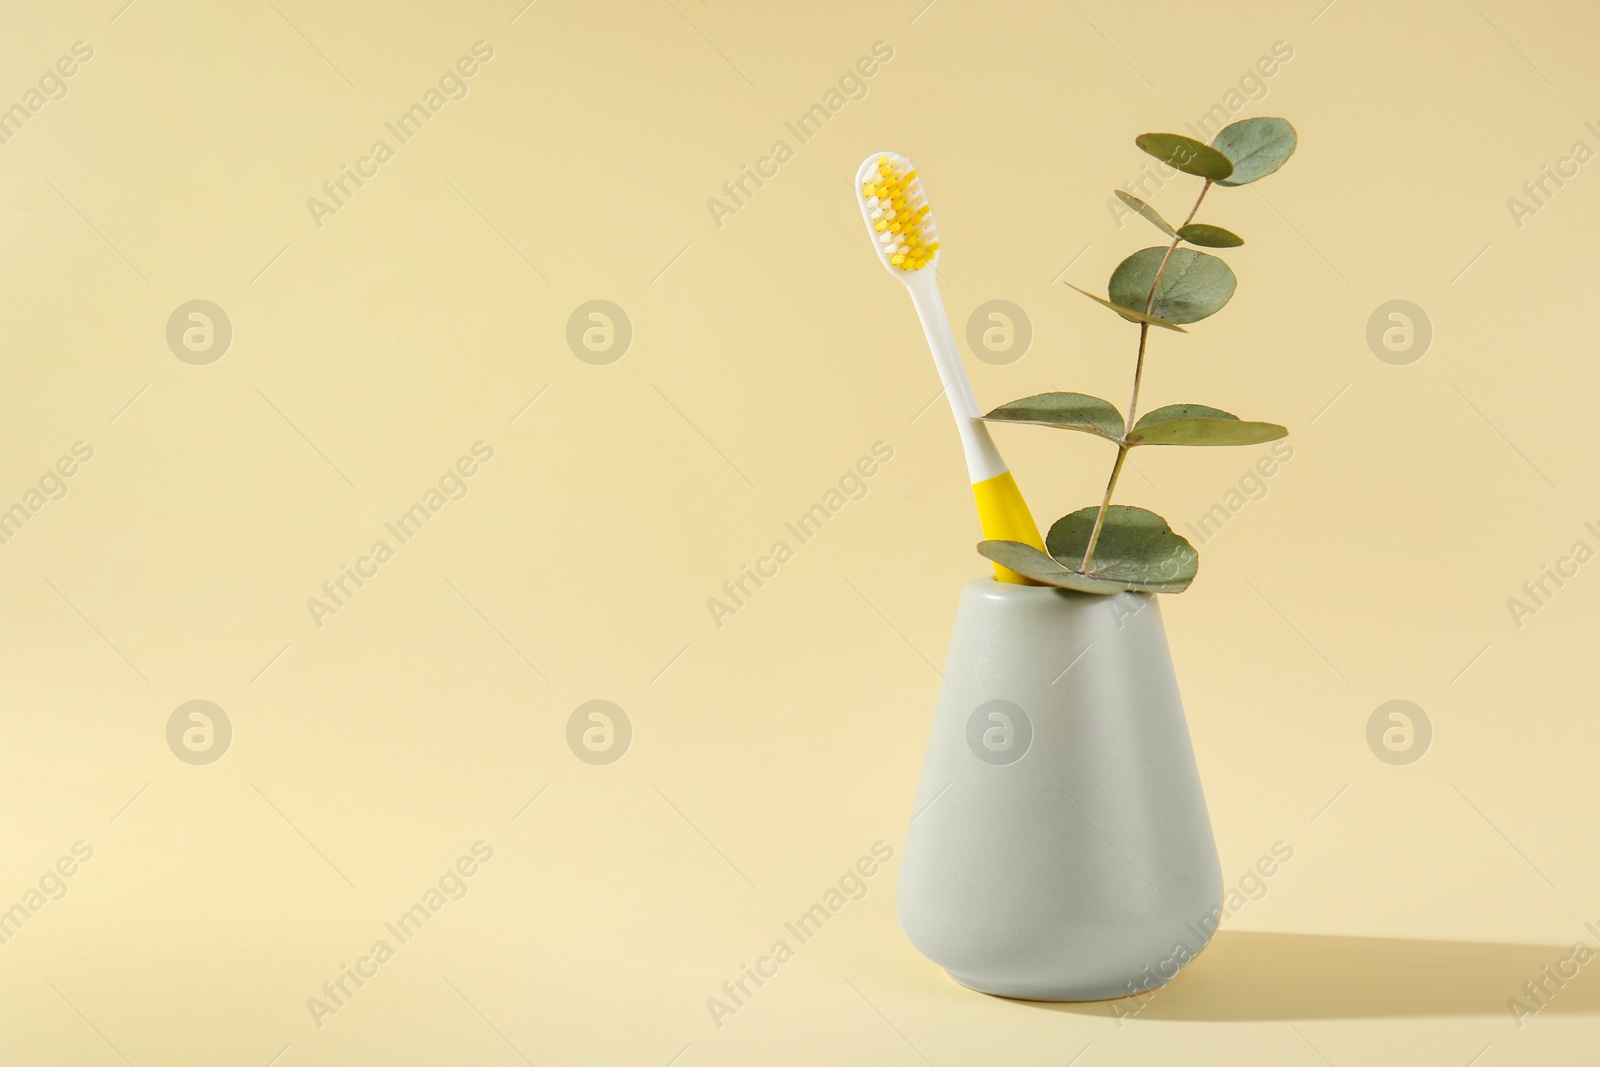 Photo of Plastic toothbrush and eucalyptus branch in holder on pale yellow background, space for text